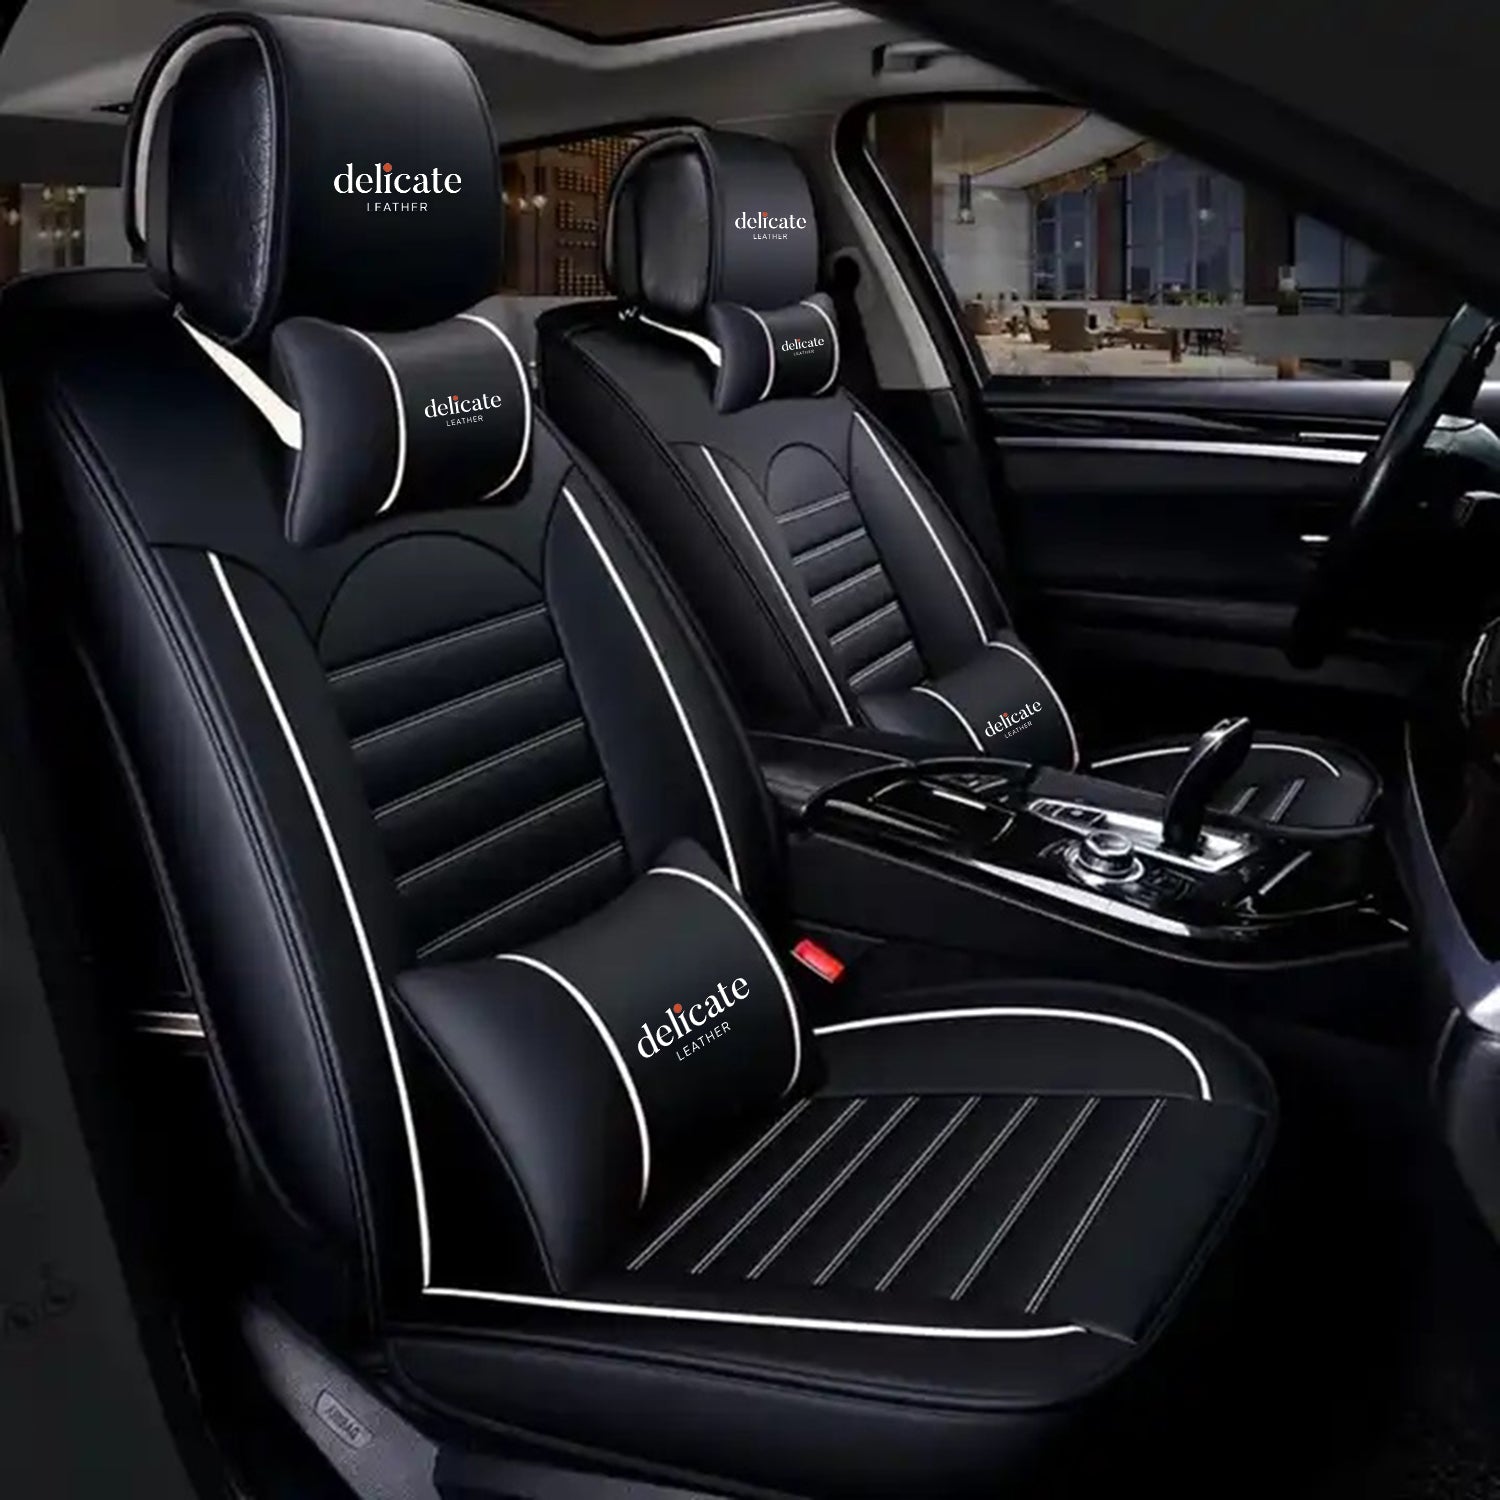 Delicate Leather Car Seat Cover Quality Universal PU leather 5d car seats cover - Delicate Leather